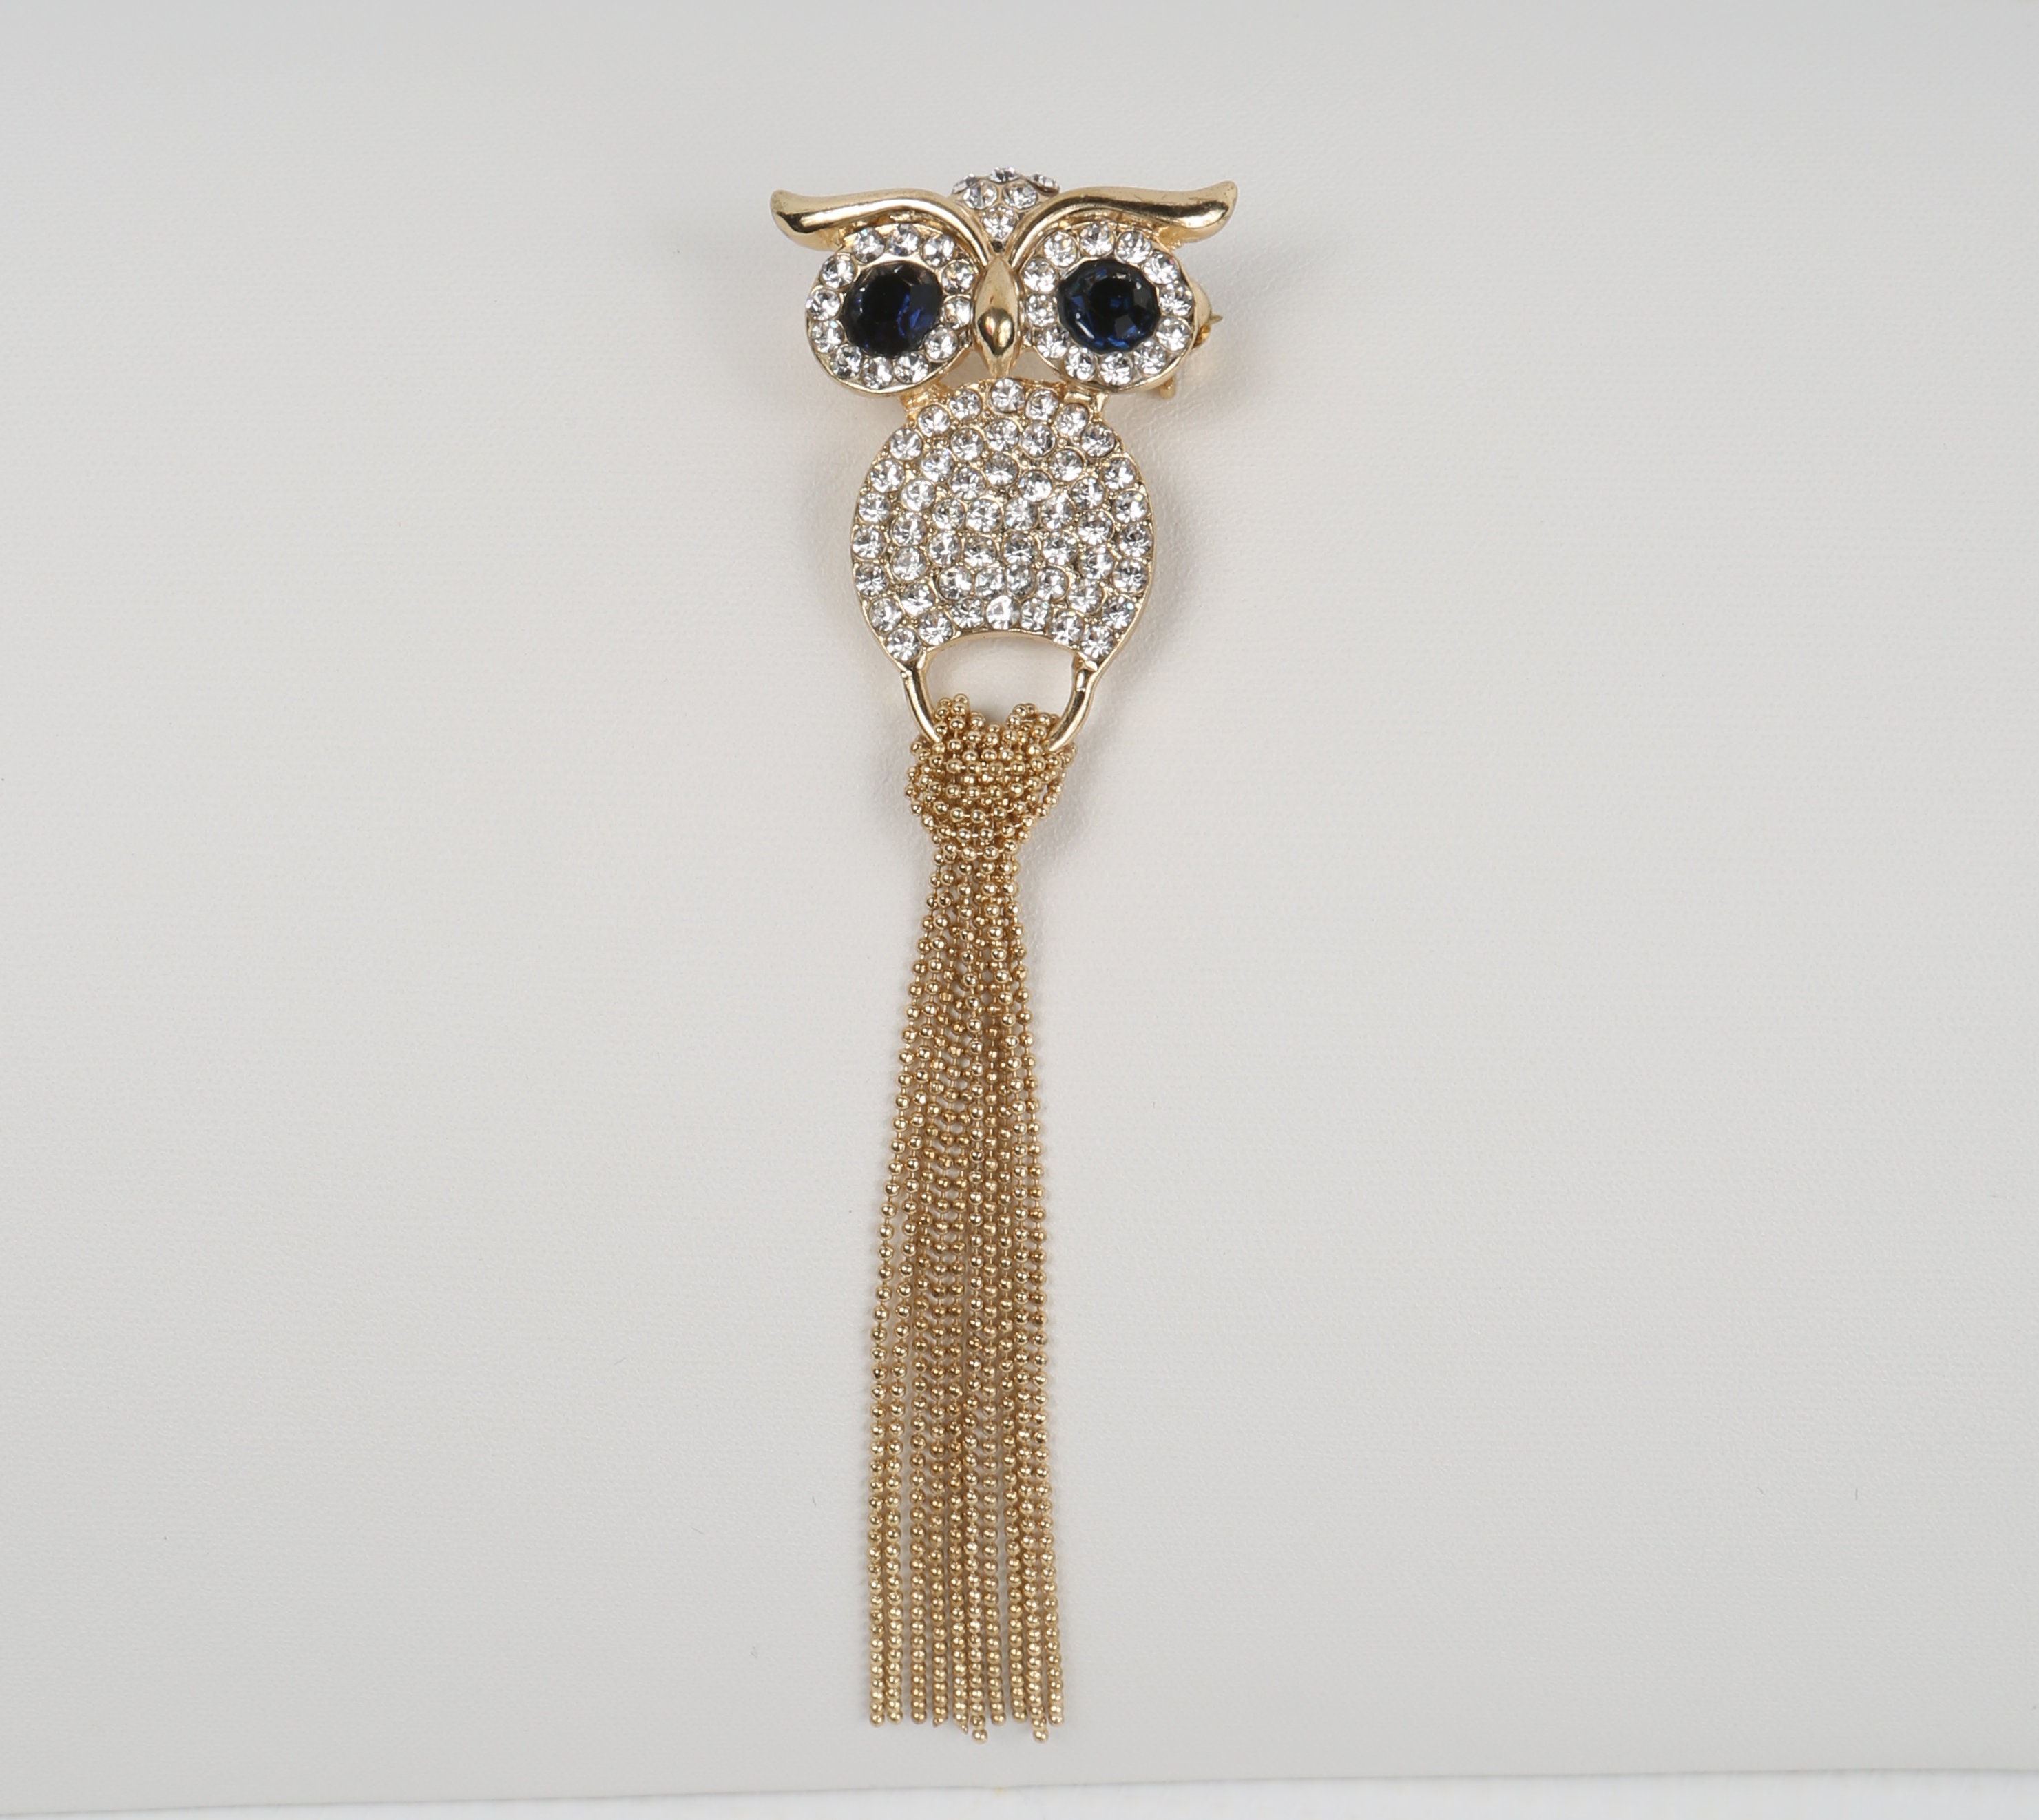 1980's Long Tail Owl Pin, Art Deco Pave Owl Brooch. Teal/Green Crystal Eyes on Gold Tone. Long C